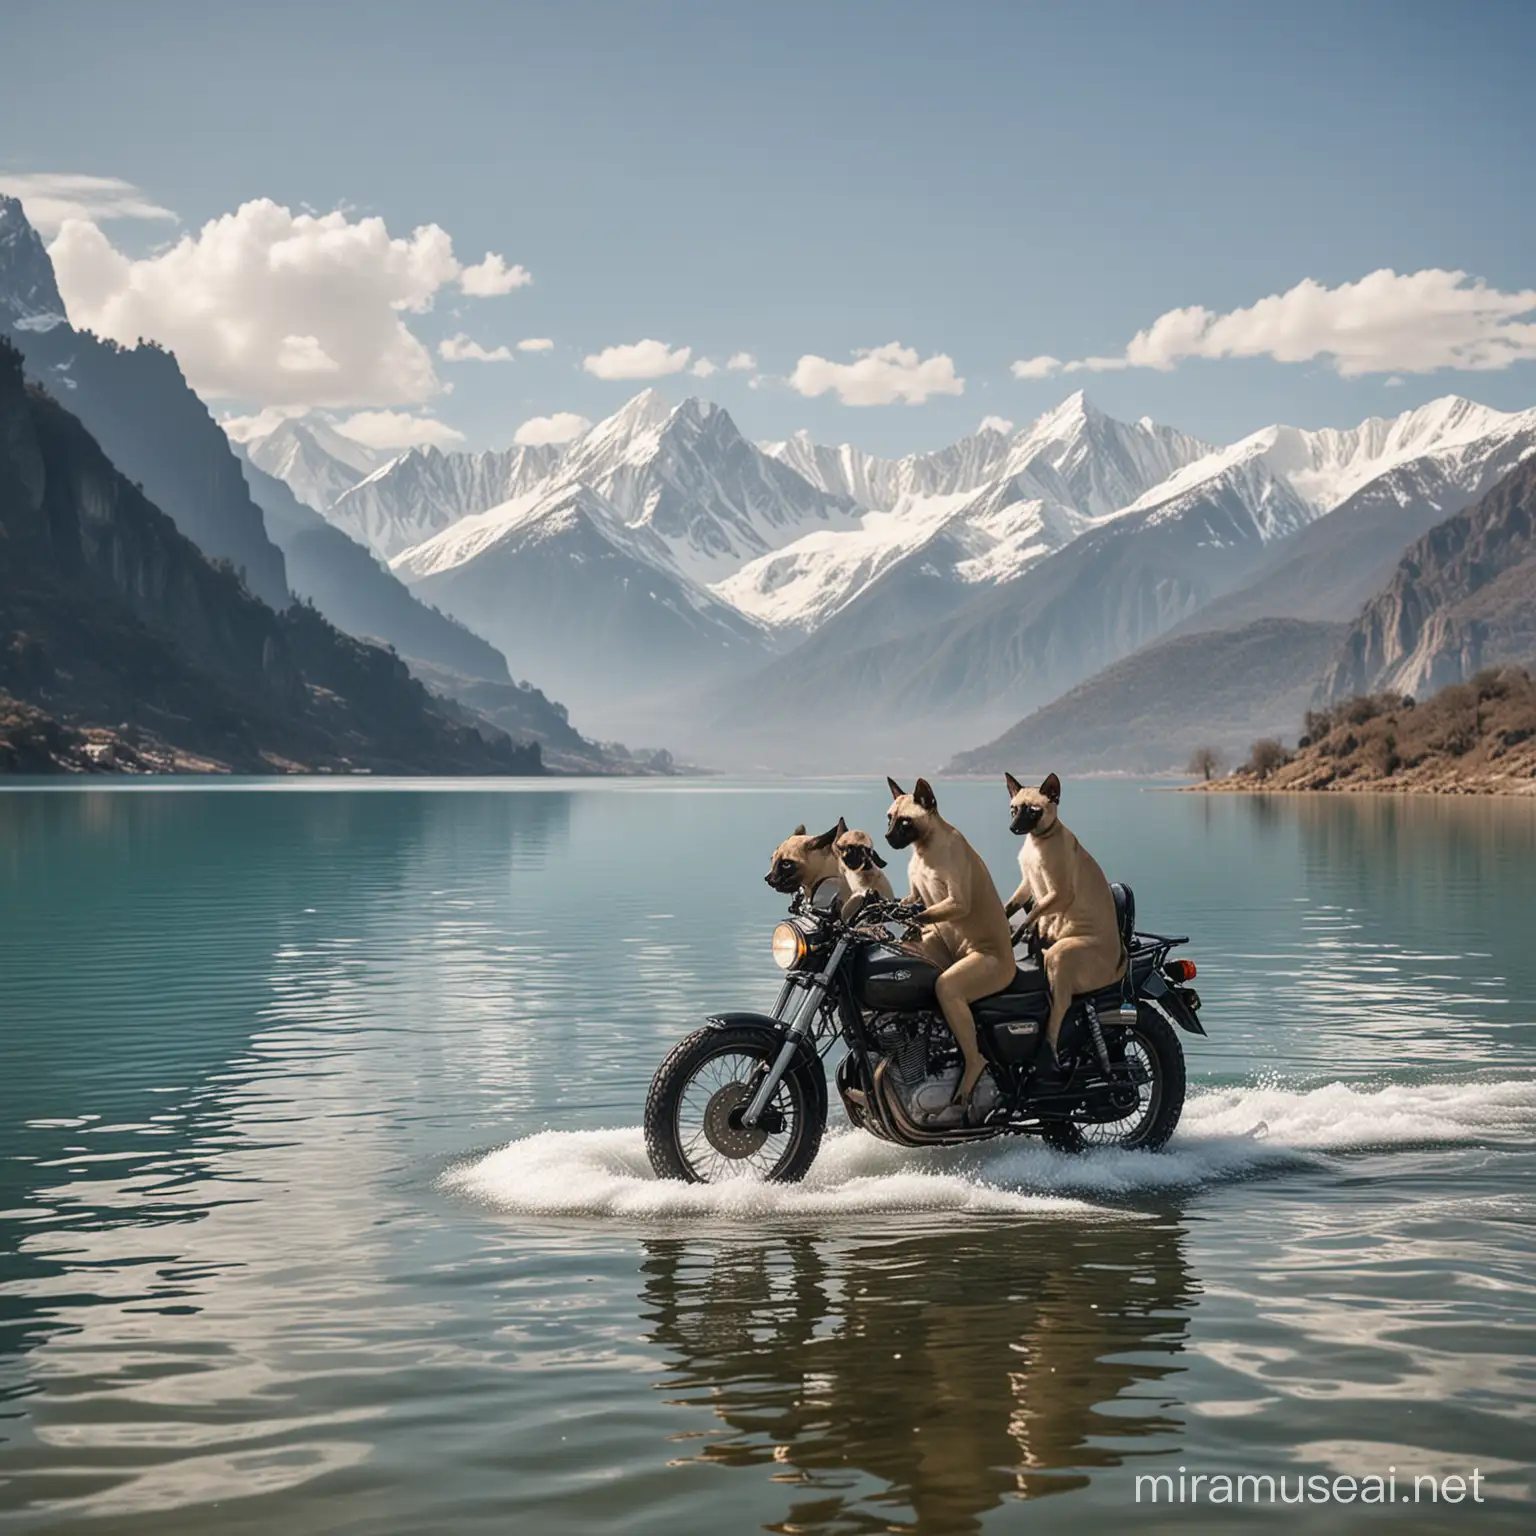 Siamese quadrupeds ride a motorcycle on the water surface, in the background a mountain with snow-capped peaks